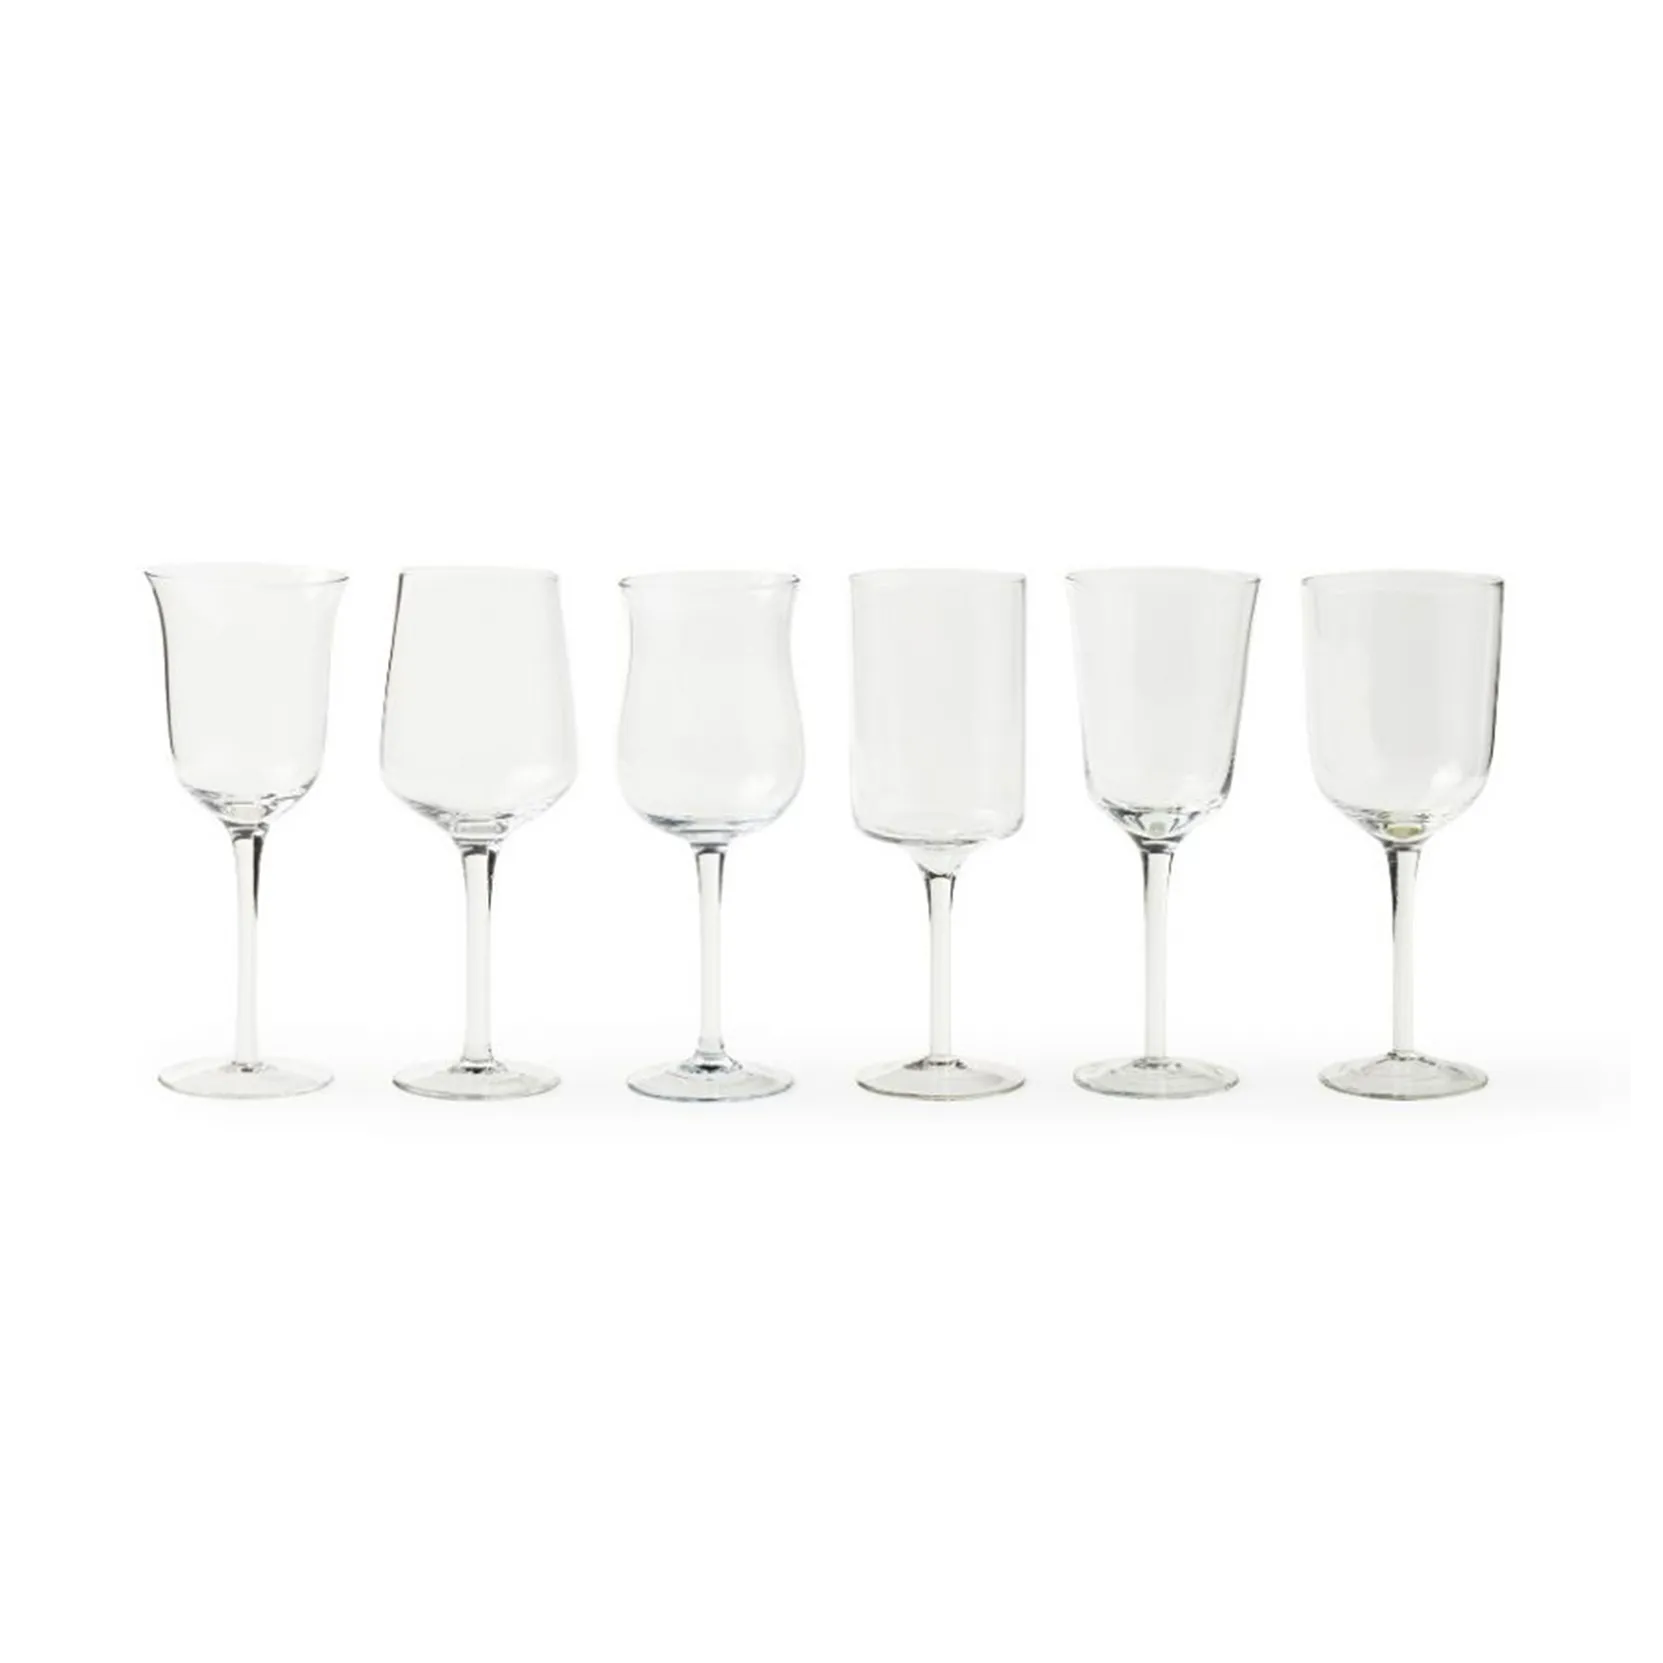 https://www.barthome.shop/91236-thickbox_default/glasses-glass-of-water-clear-bitossi-home.jpg